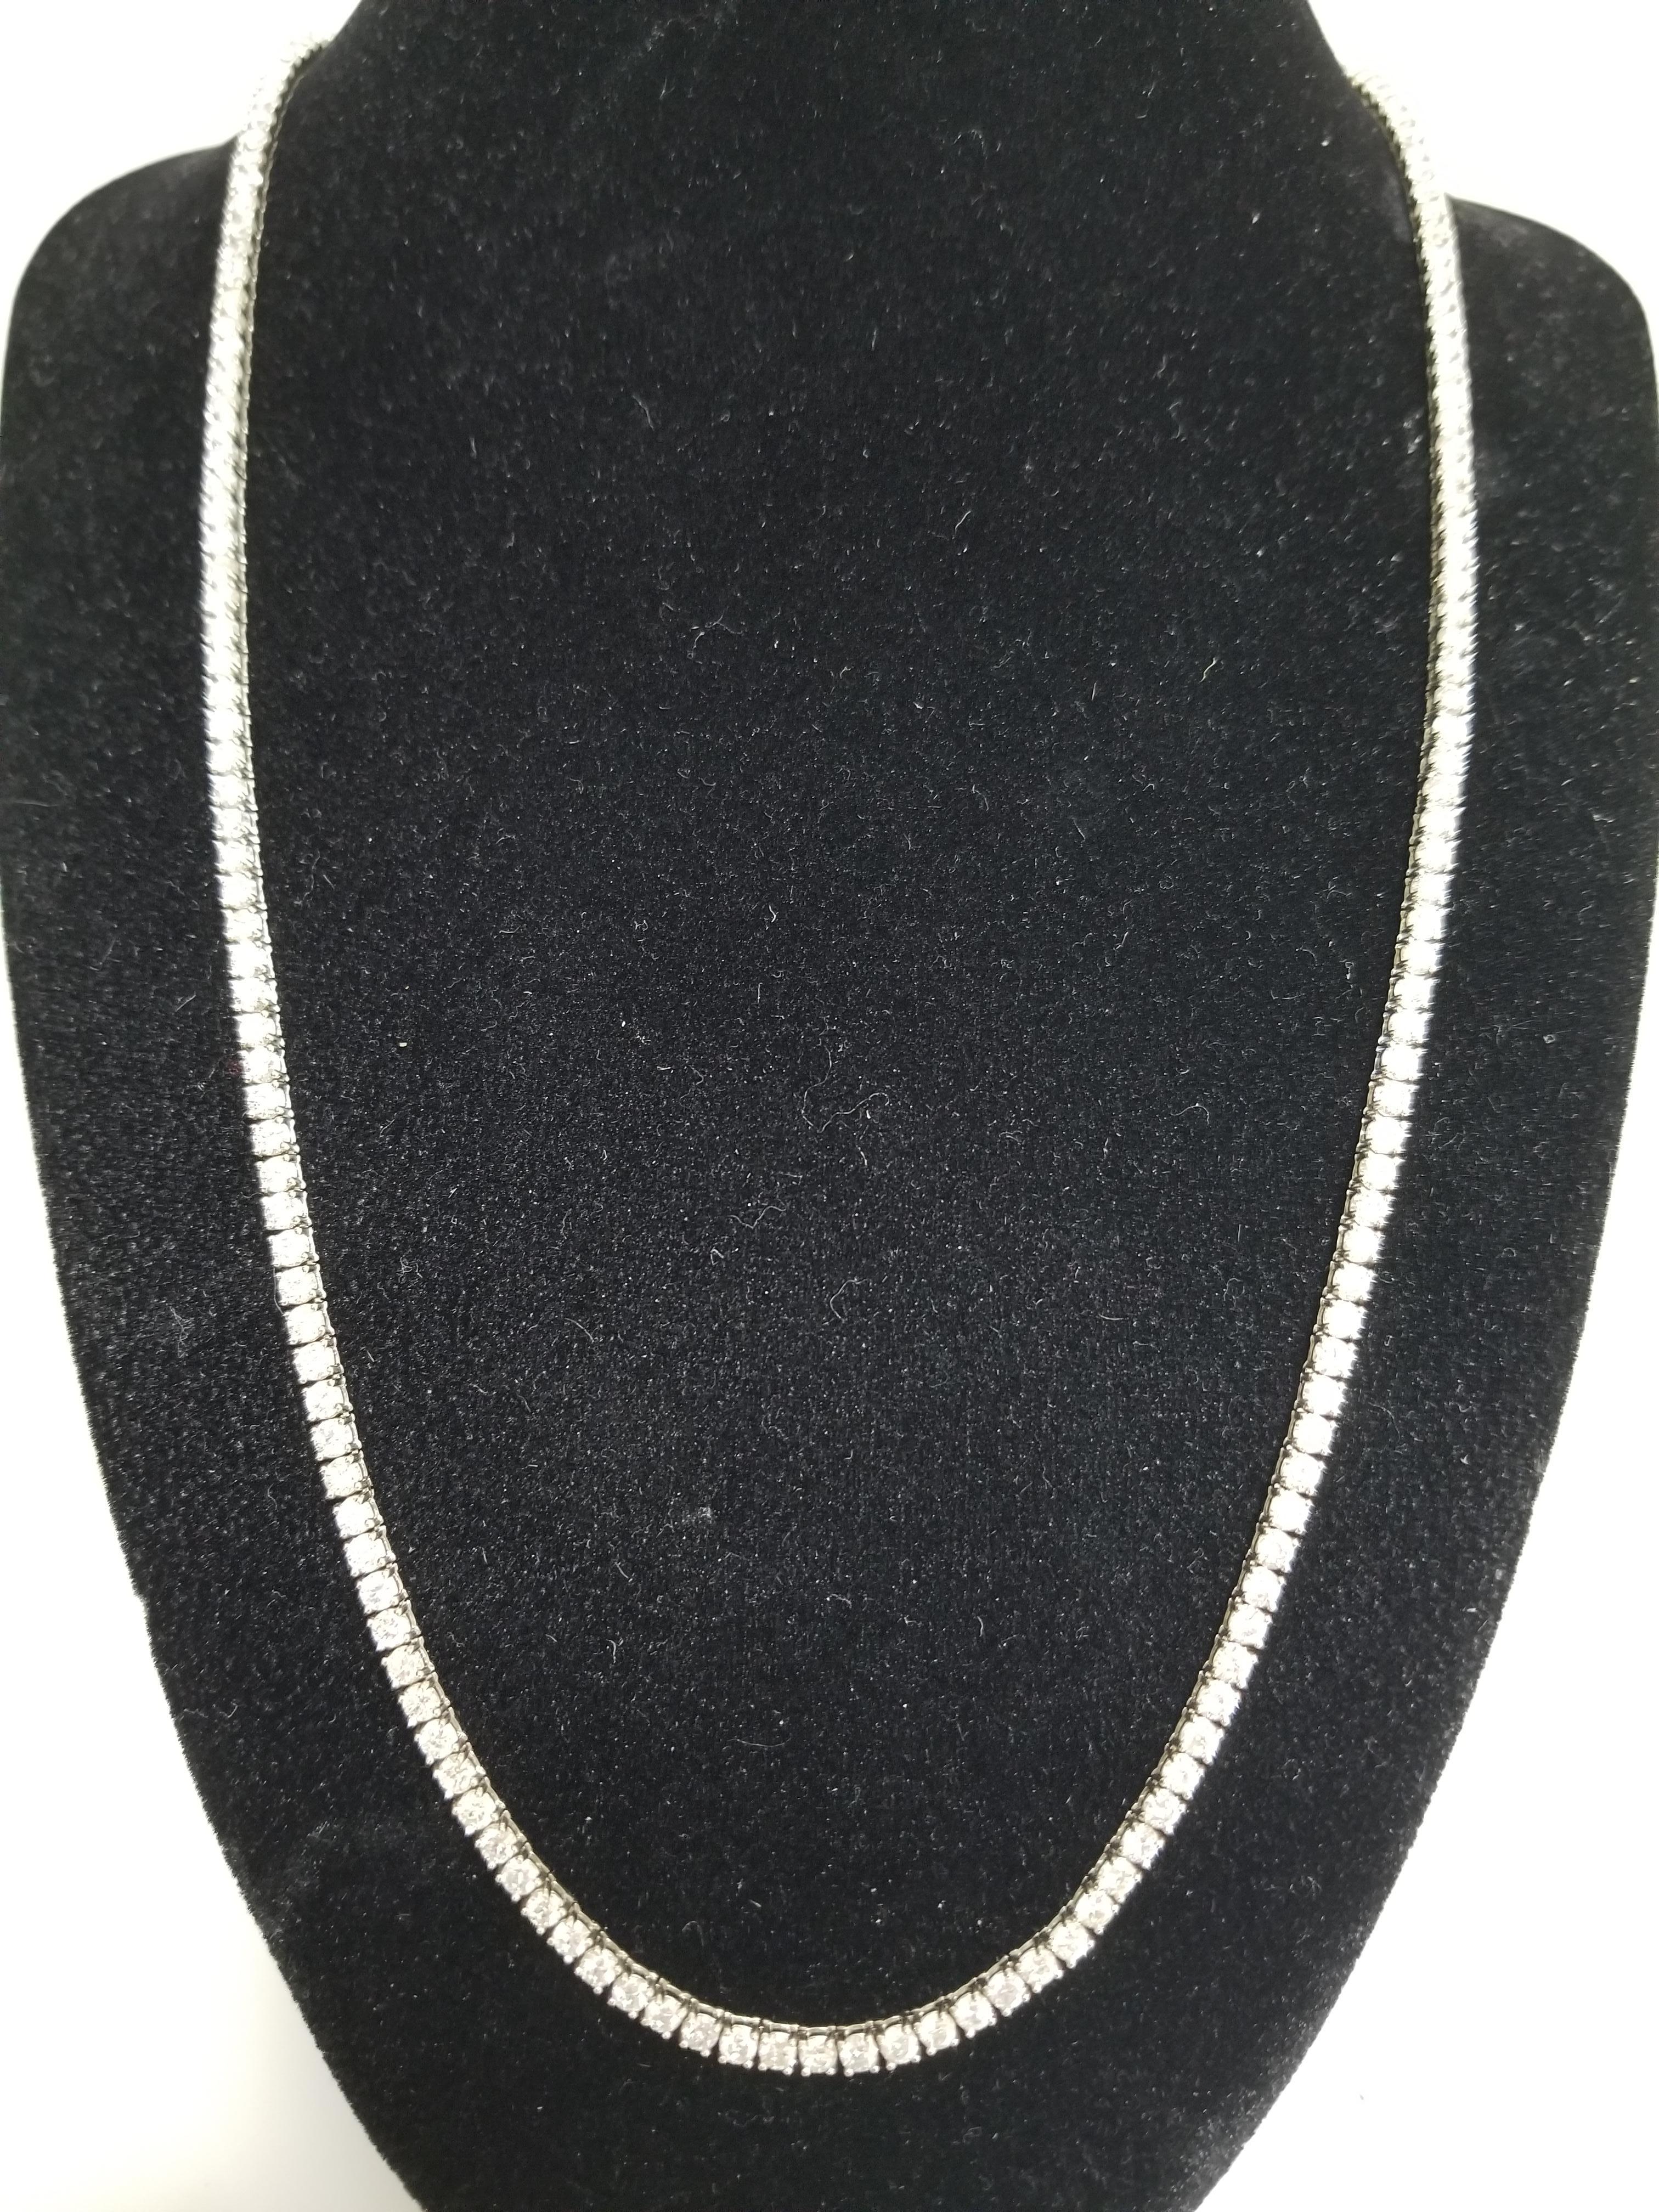 Brilliant and beautiful tennis necklace, natural round-brilliant cut white diamonds clean and Excellent shine. 14k white gold classic four-prong style for maximum light brilliance. Because a sparkling diamond can change your life.

Average Color H-I